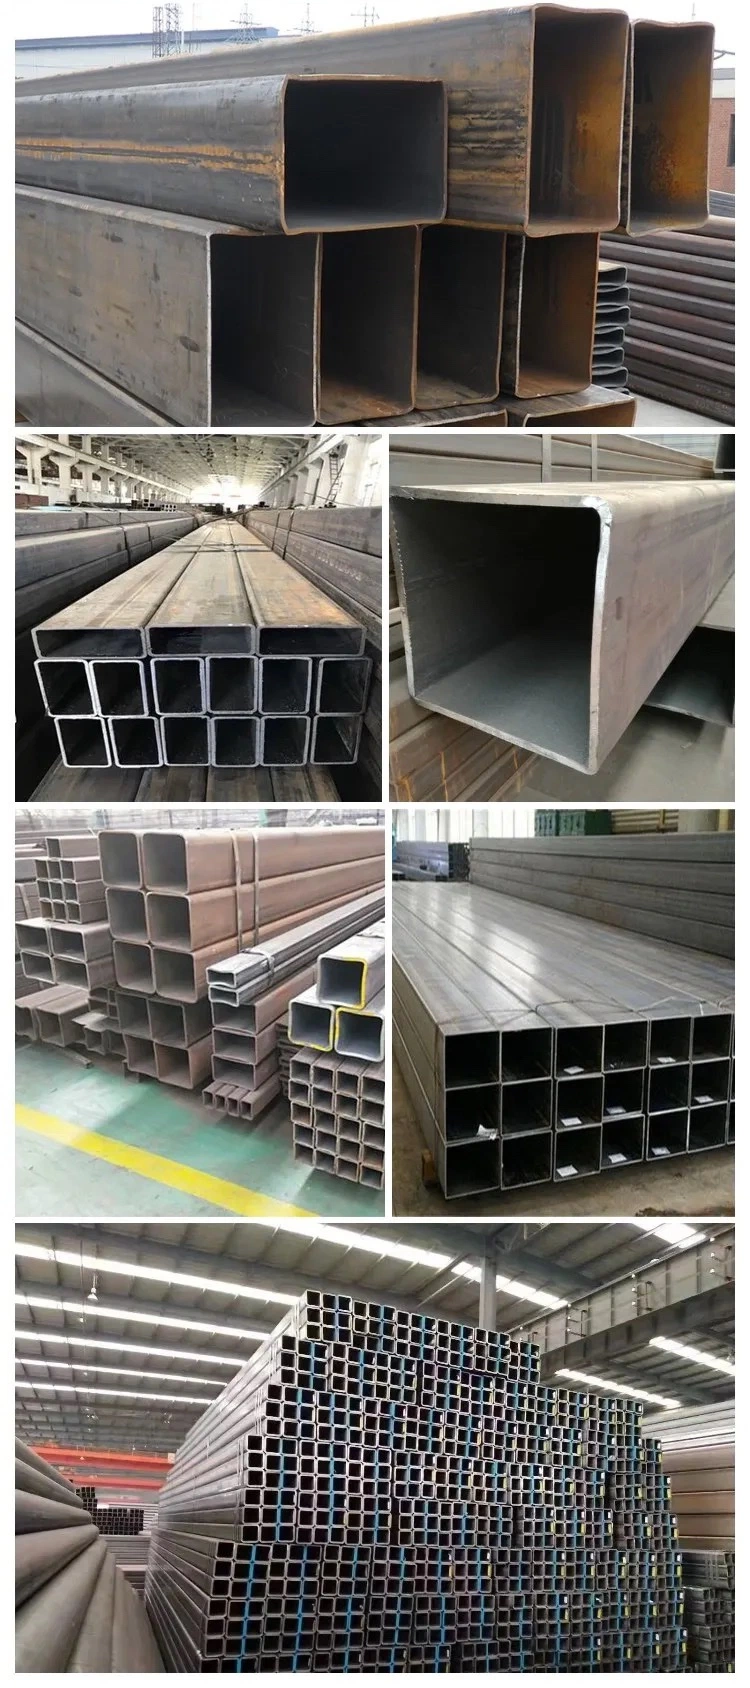 ASTM A252 Construction Hydraulic Carbon Spiral Steel Pipe API 5L X42 X52 X70 SSAW Spiral Welded Steel Pipe Mill for Oil and Gas Line